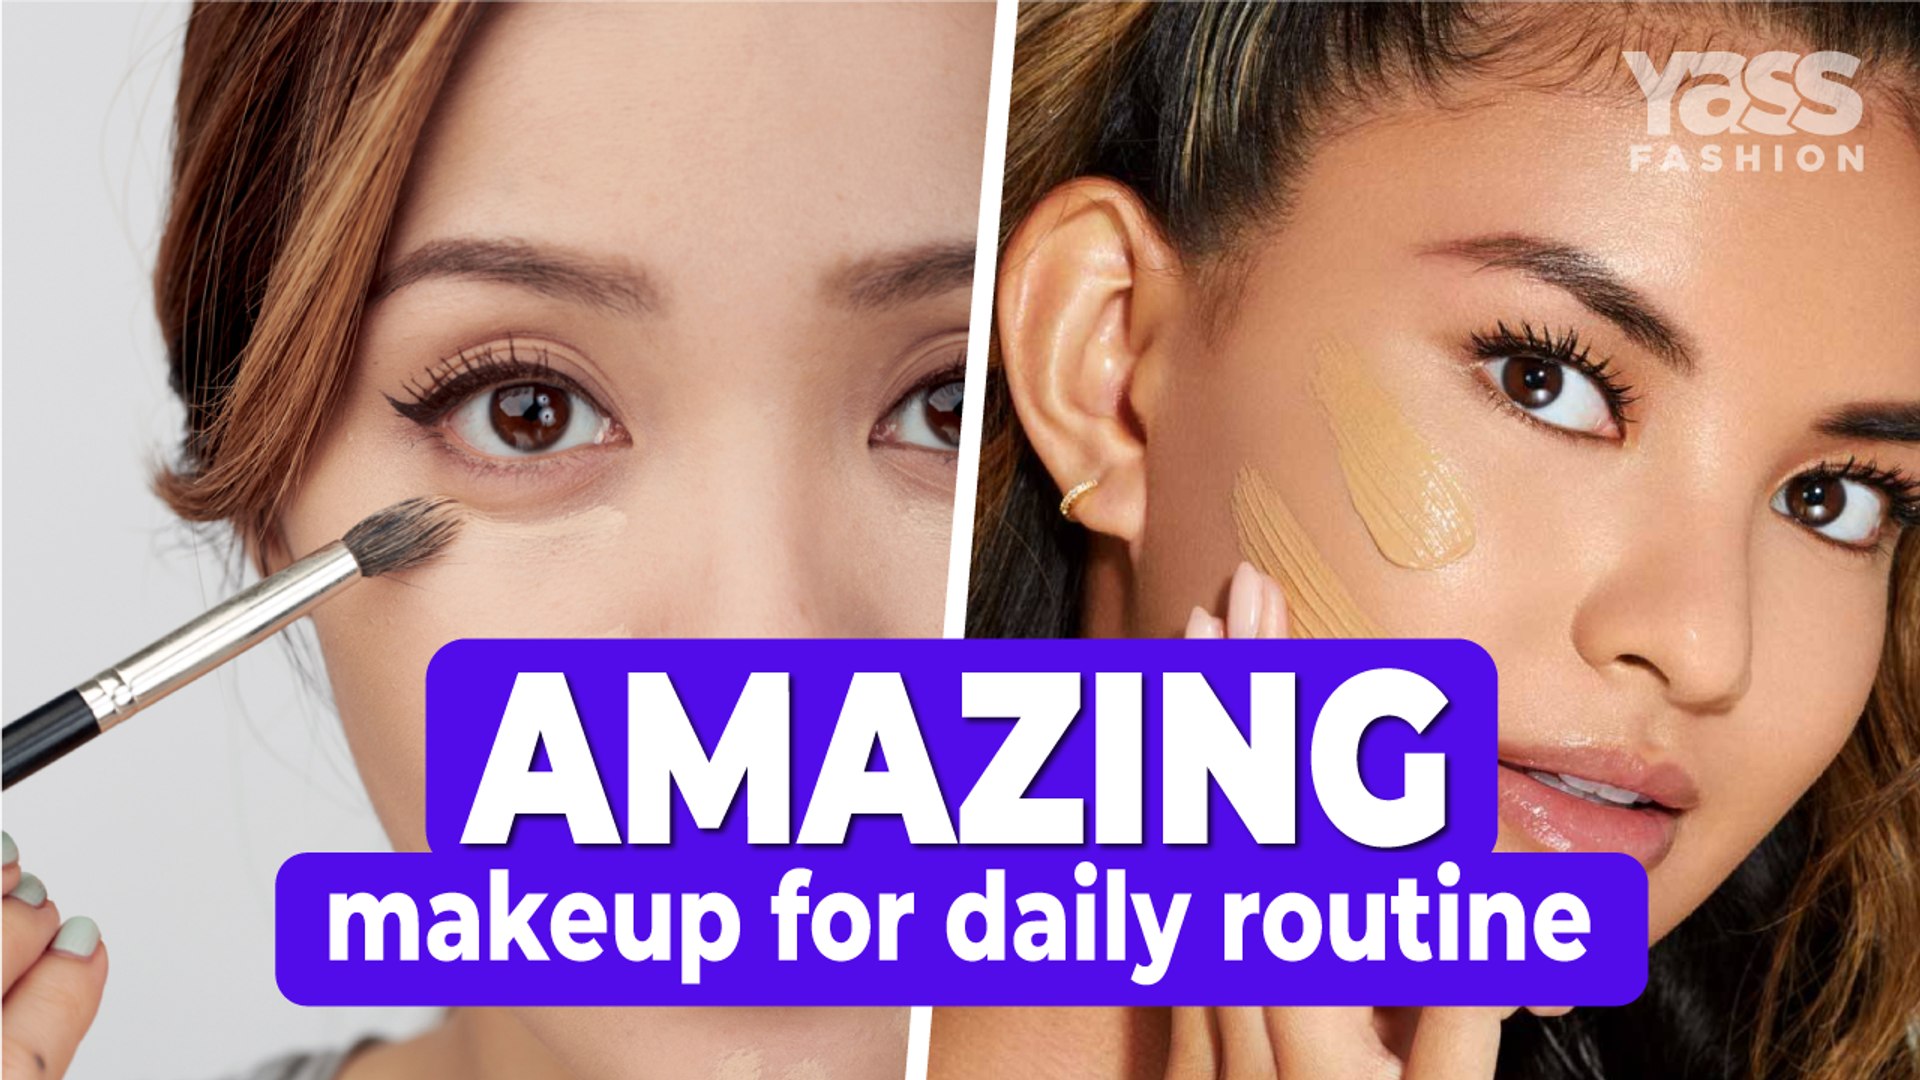 Amazing makeup for daily routine